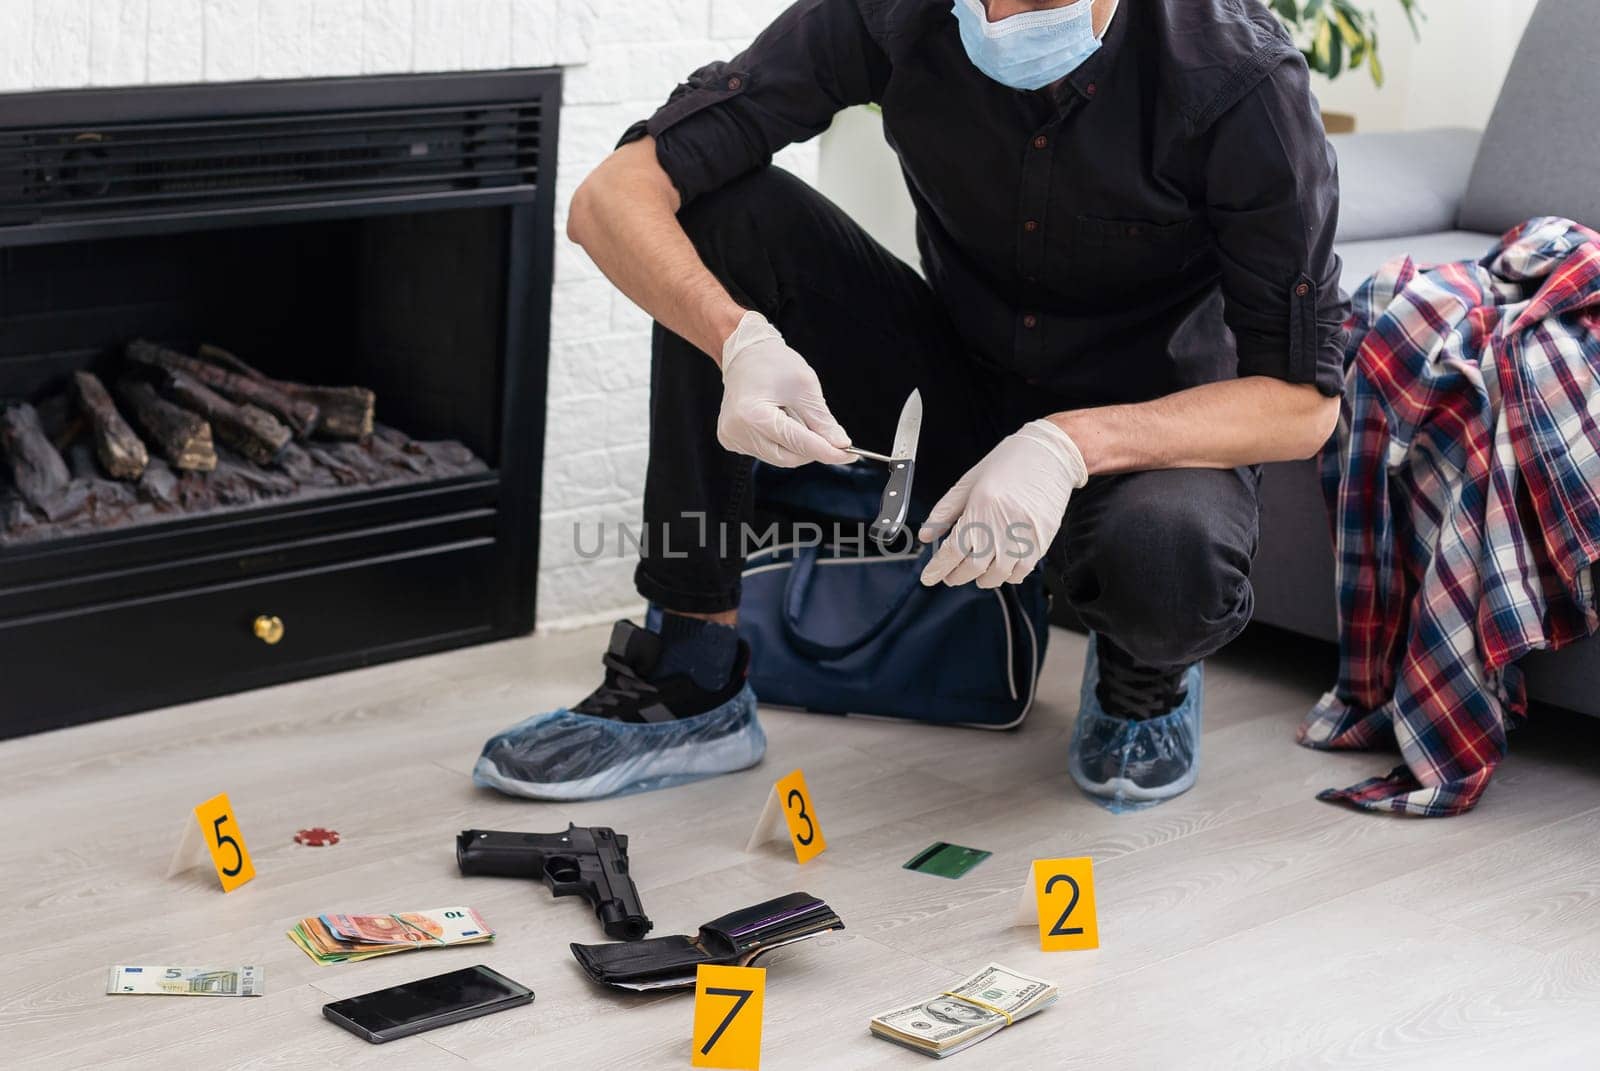 Criminological expert collecting evidence at the crime scene. High quality photo